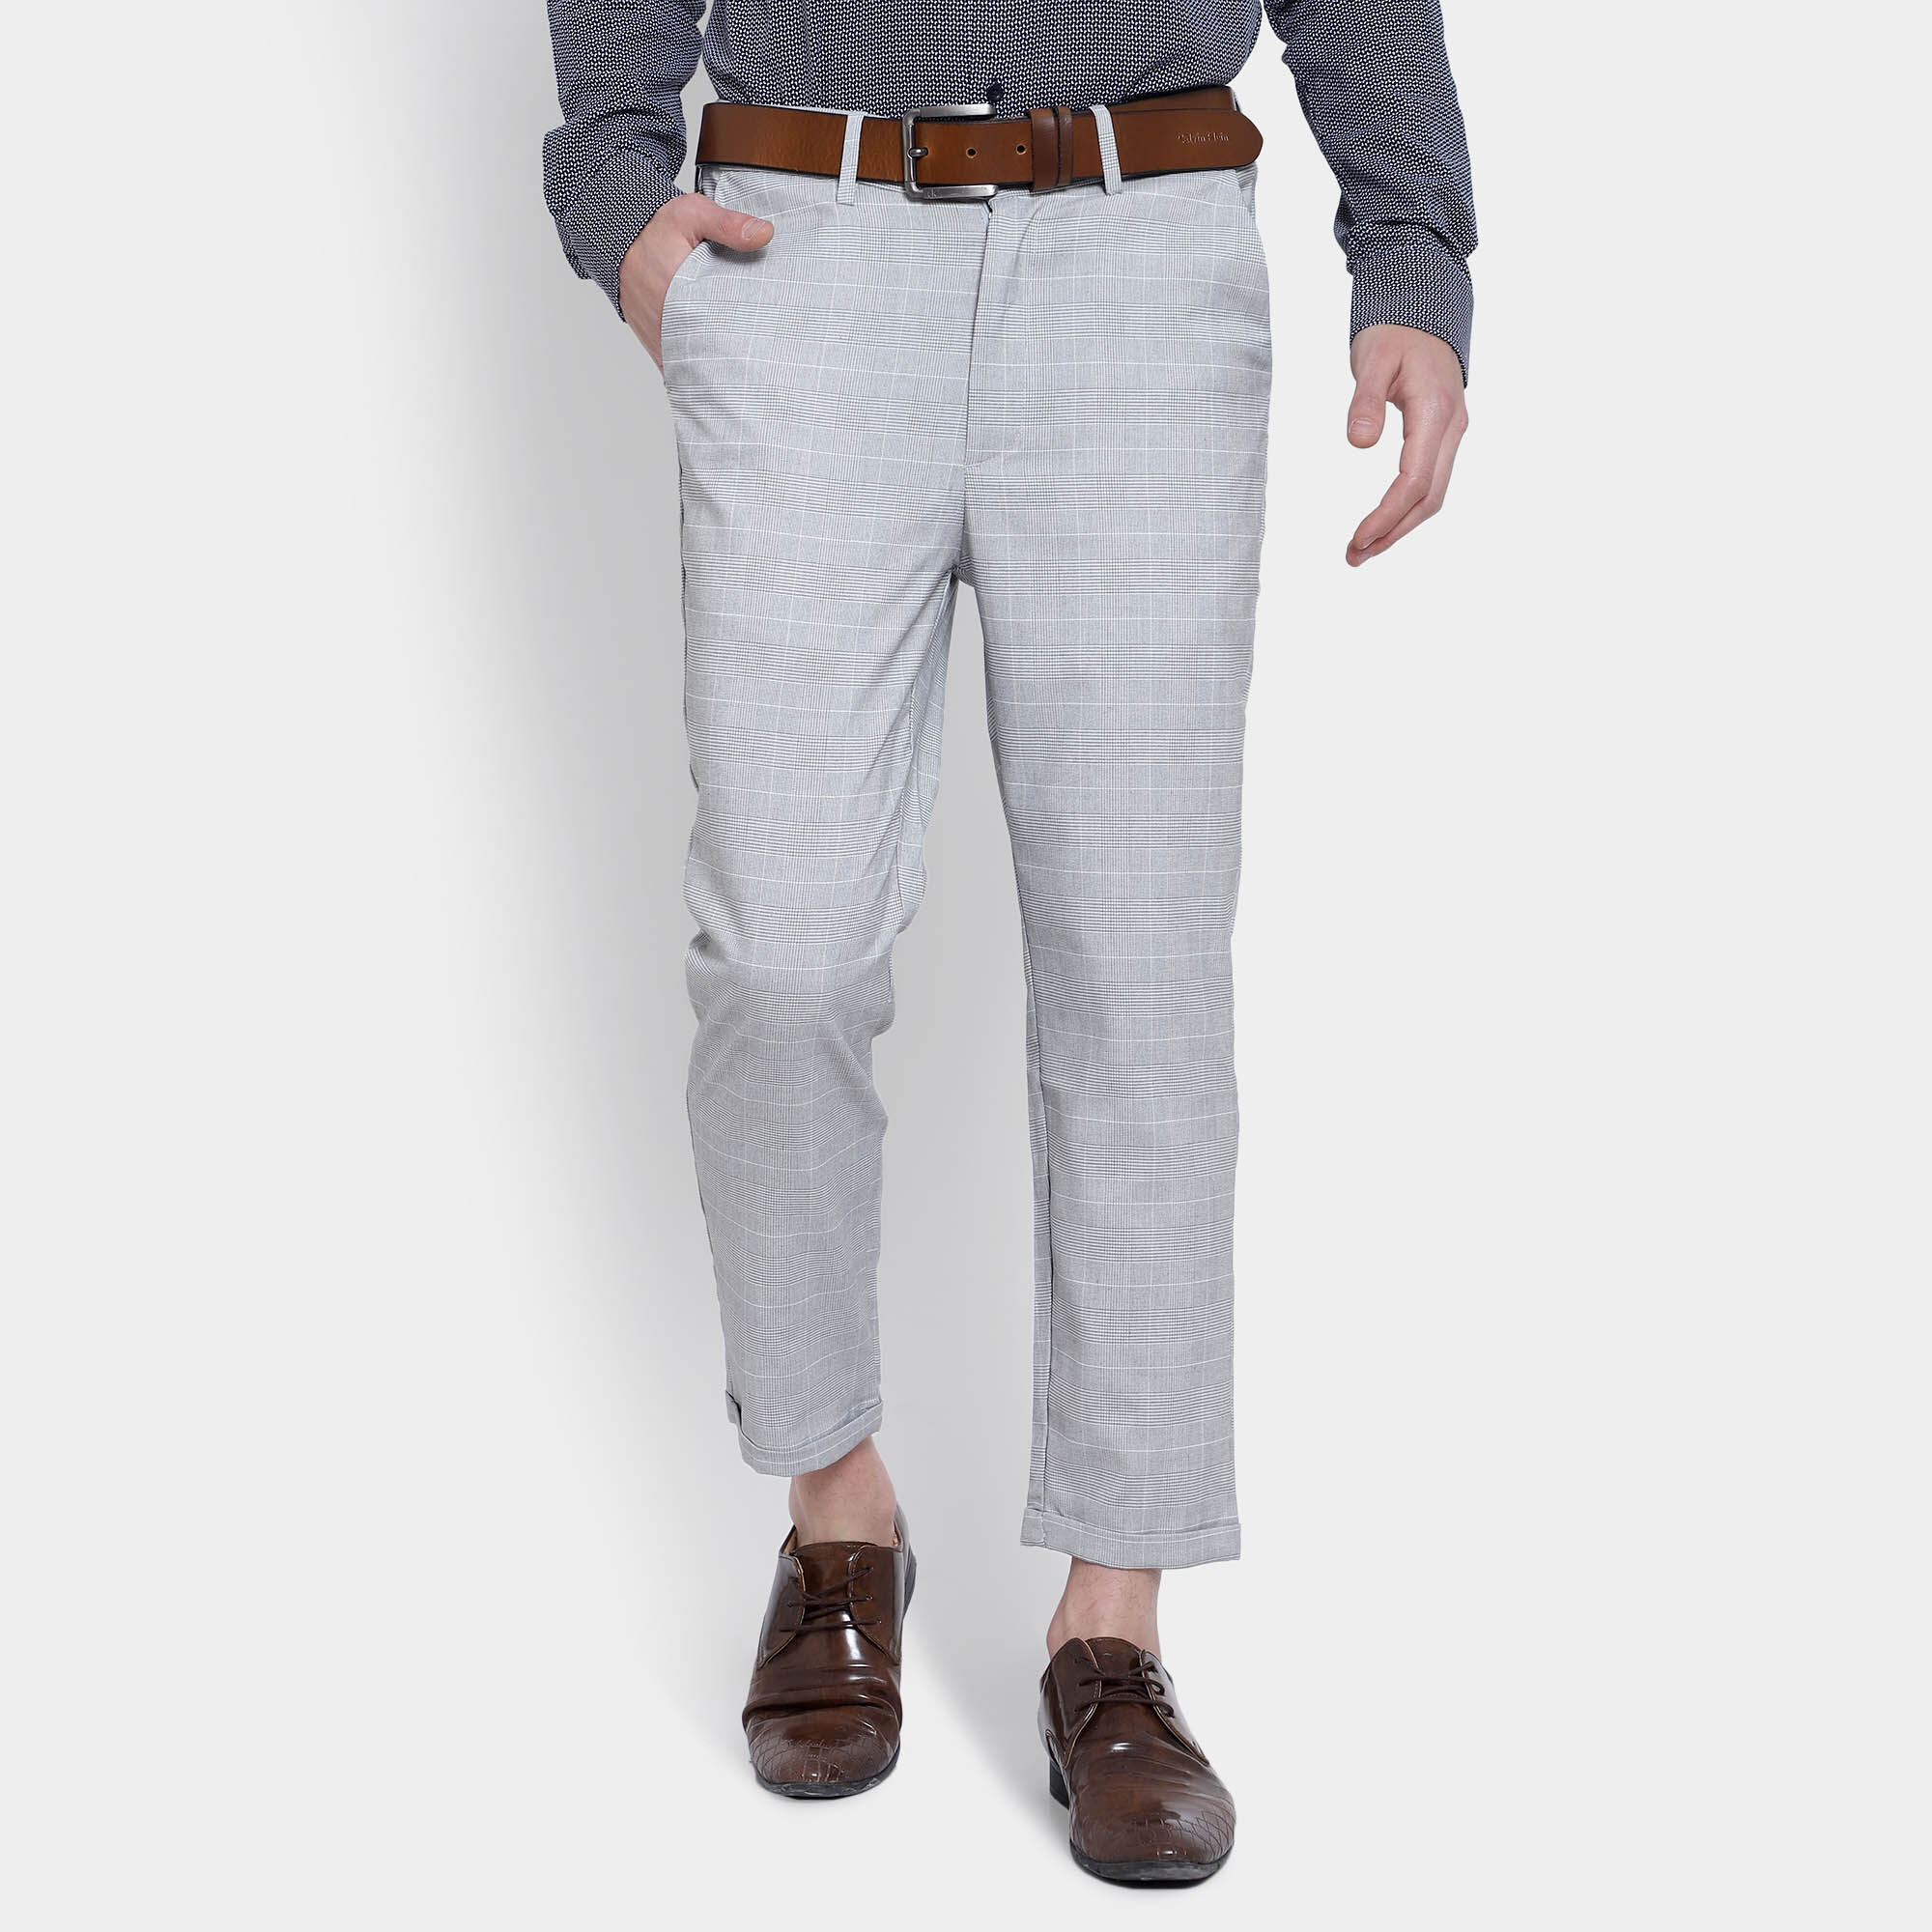 Red Cherry Flexi Wasit-Ankle Length Grey Lycra Slim Fit Men Grey Trousers -  Buy Red Cherry Flexi Wasit-Ankle Length Grey Lycra Slim Fit Men Grey  Trousers Online at Best Prices in India |